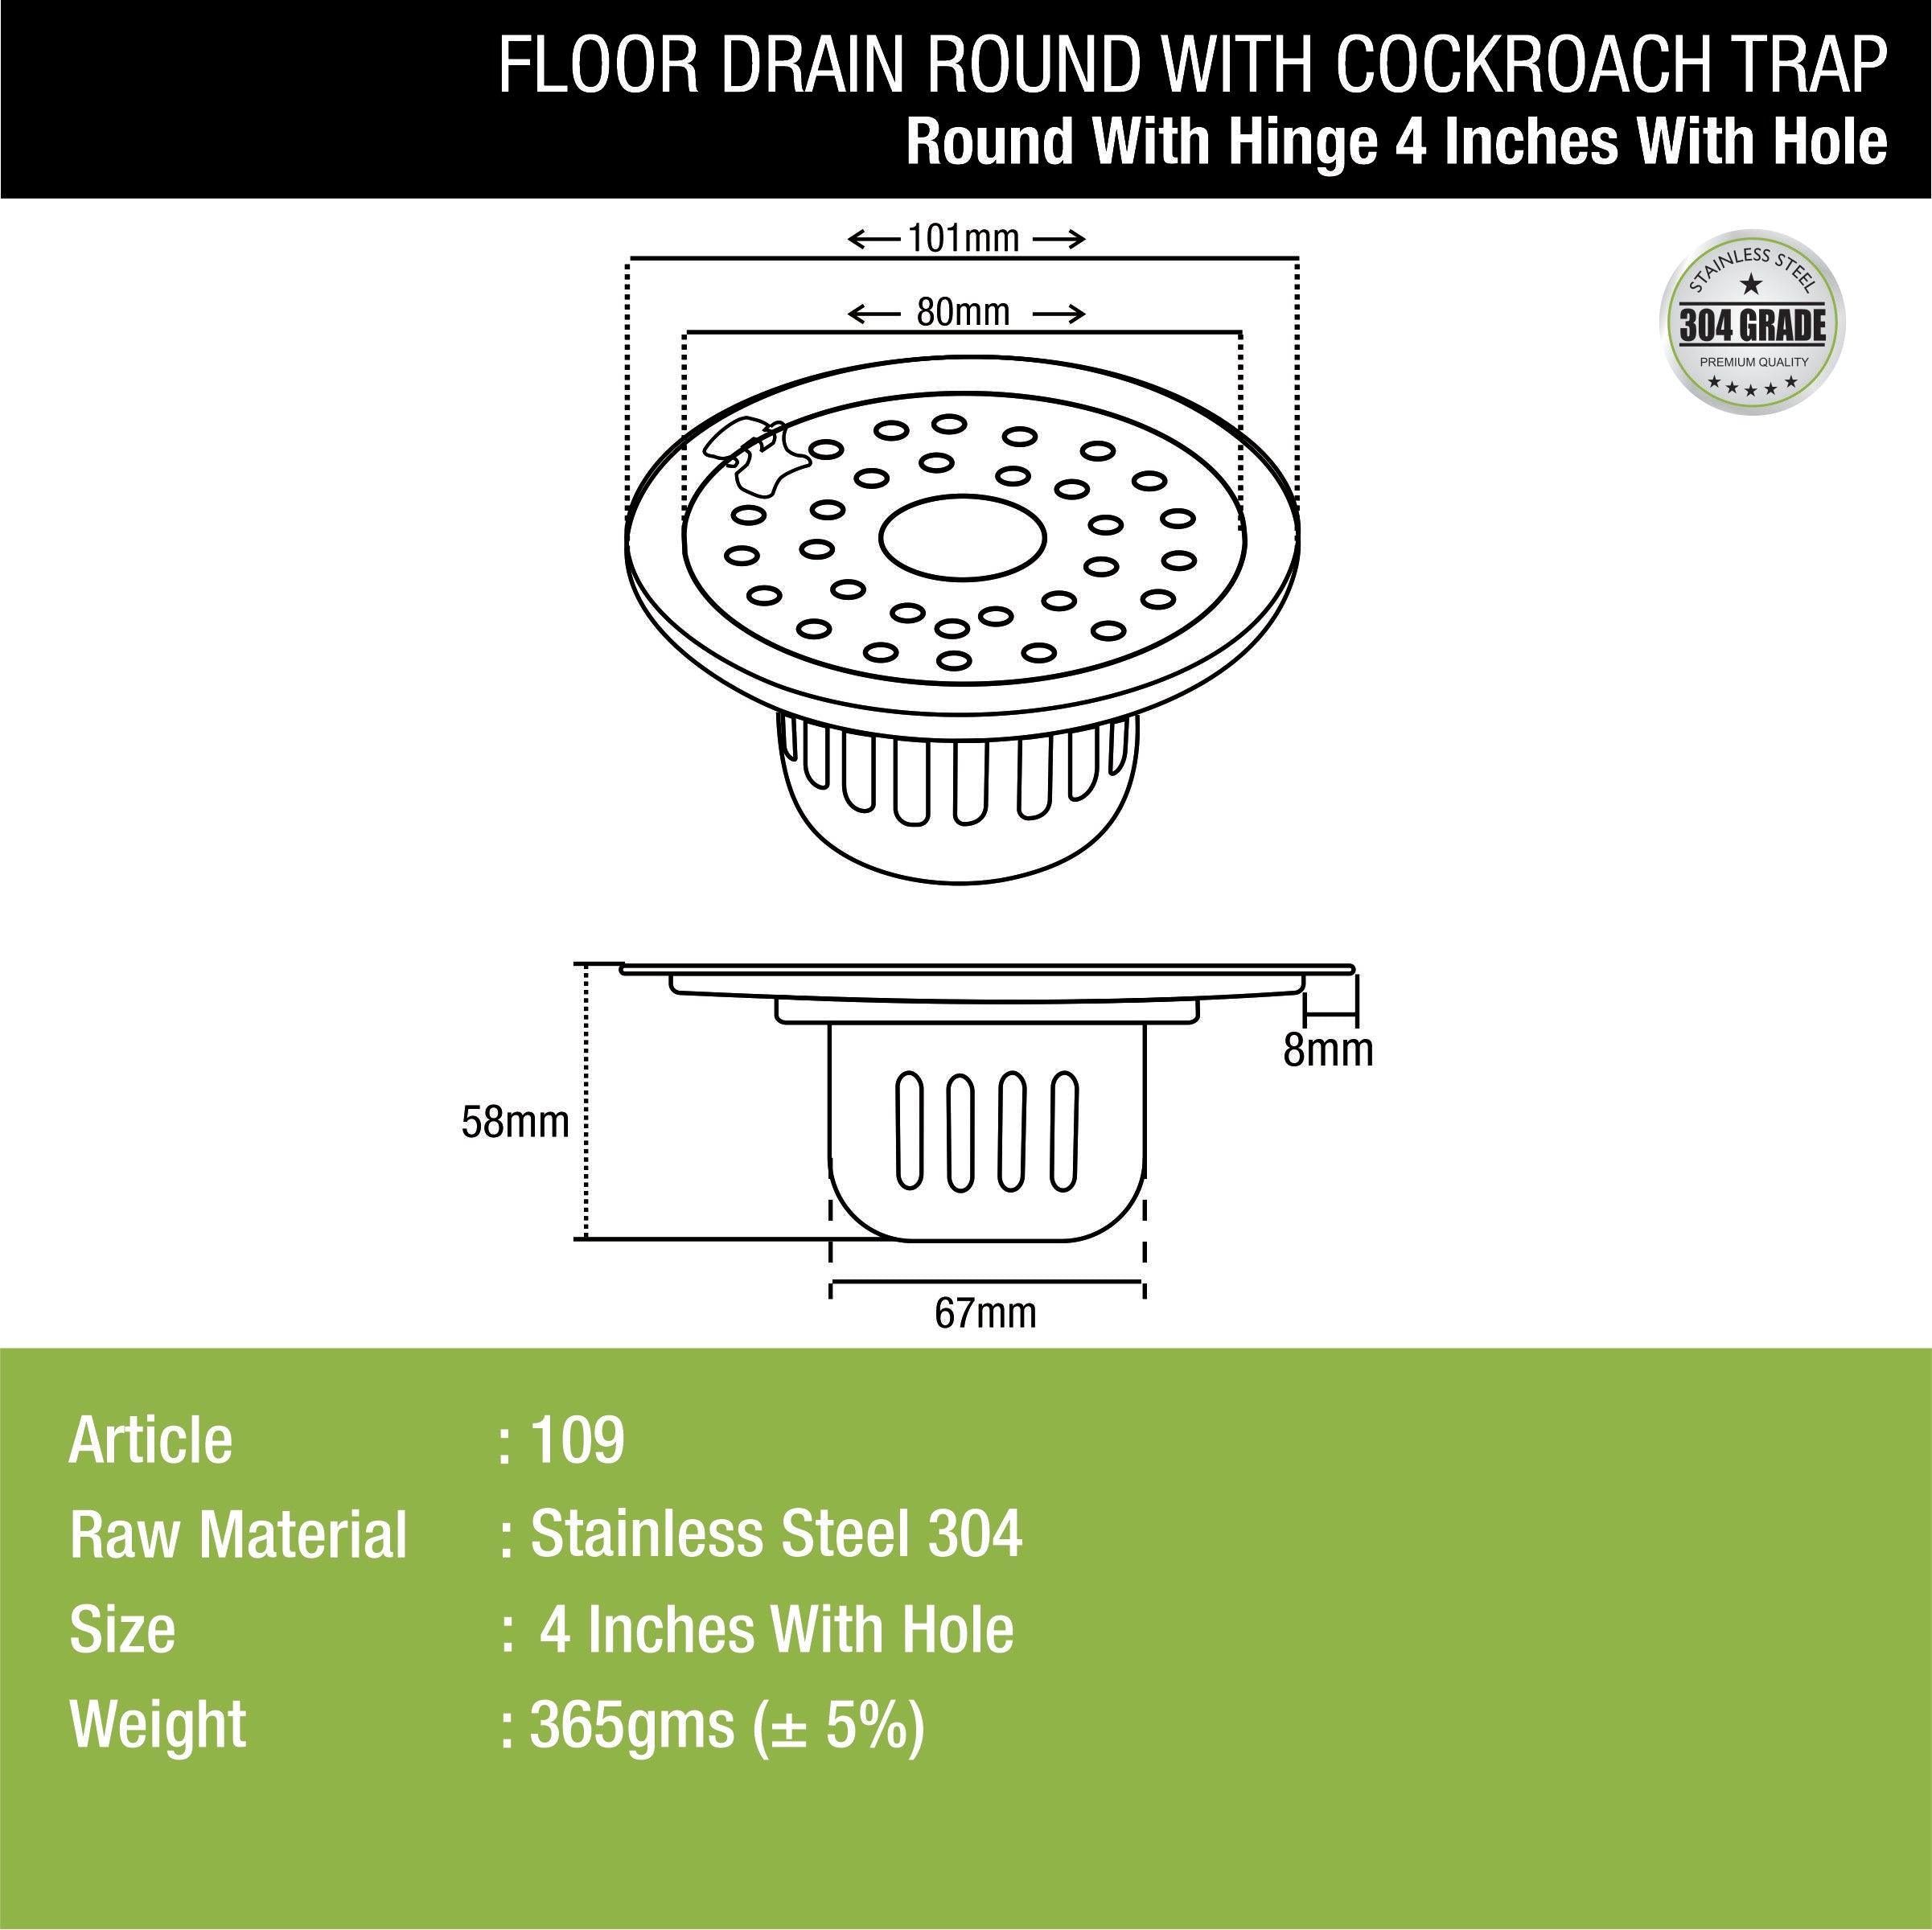 Round Floor Drain (4 inches) with Hinge, Hole & Cockroach Trap dimensions and sizes